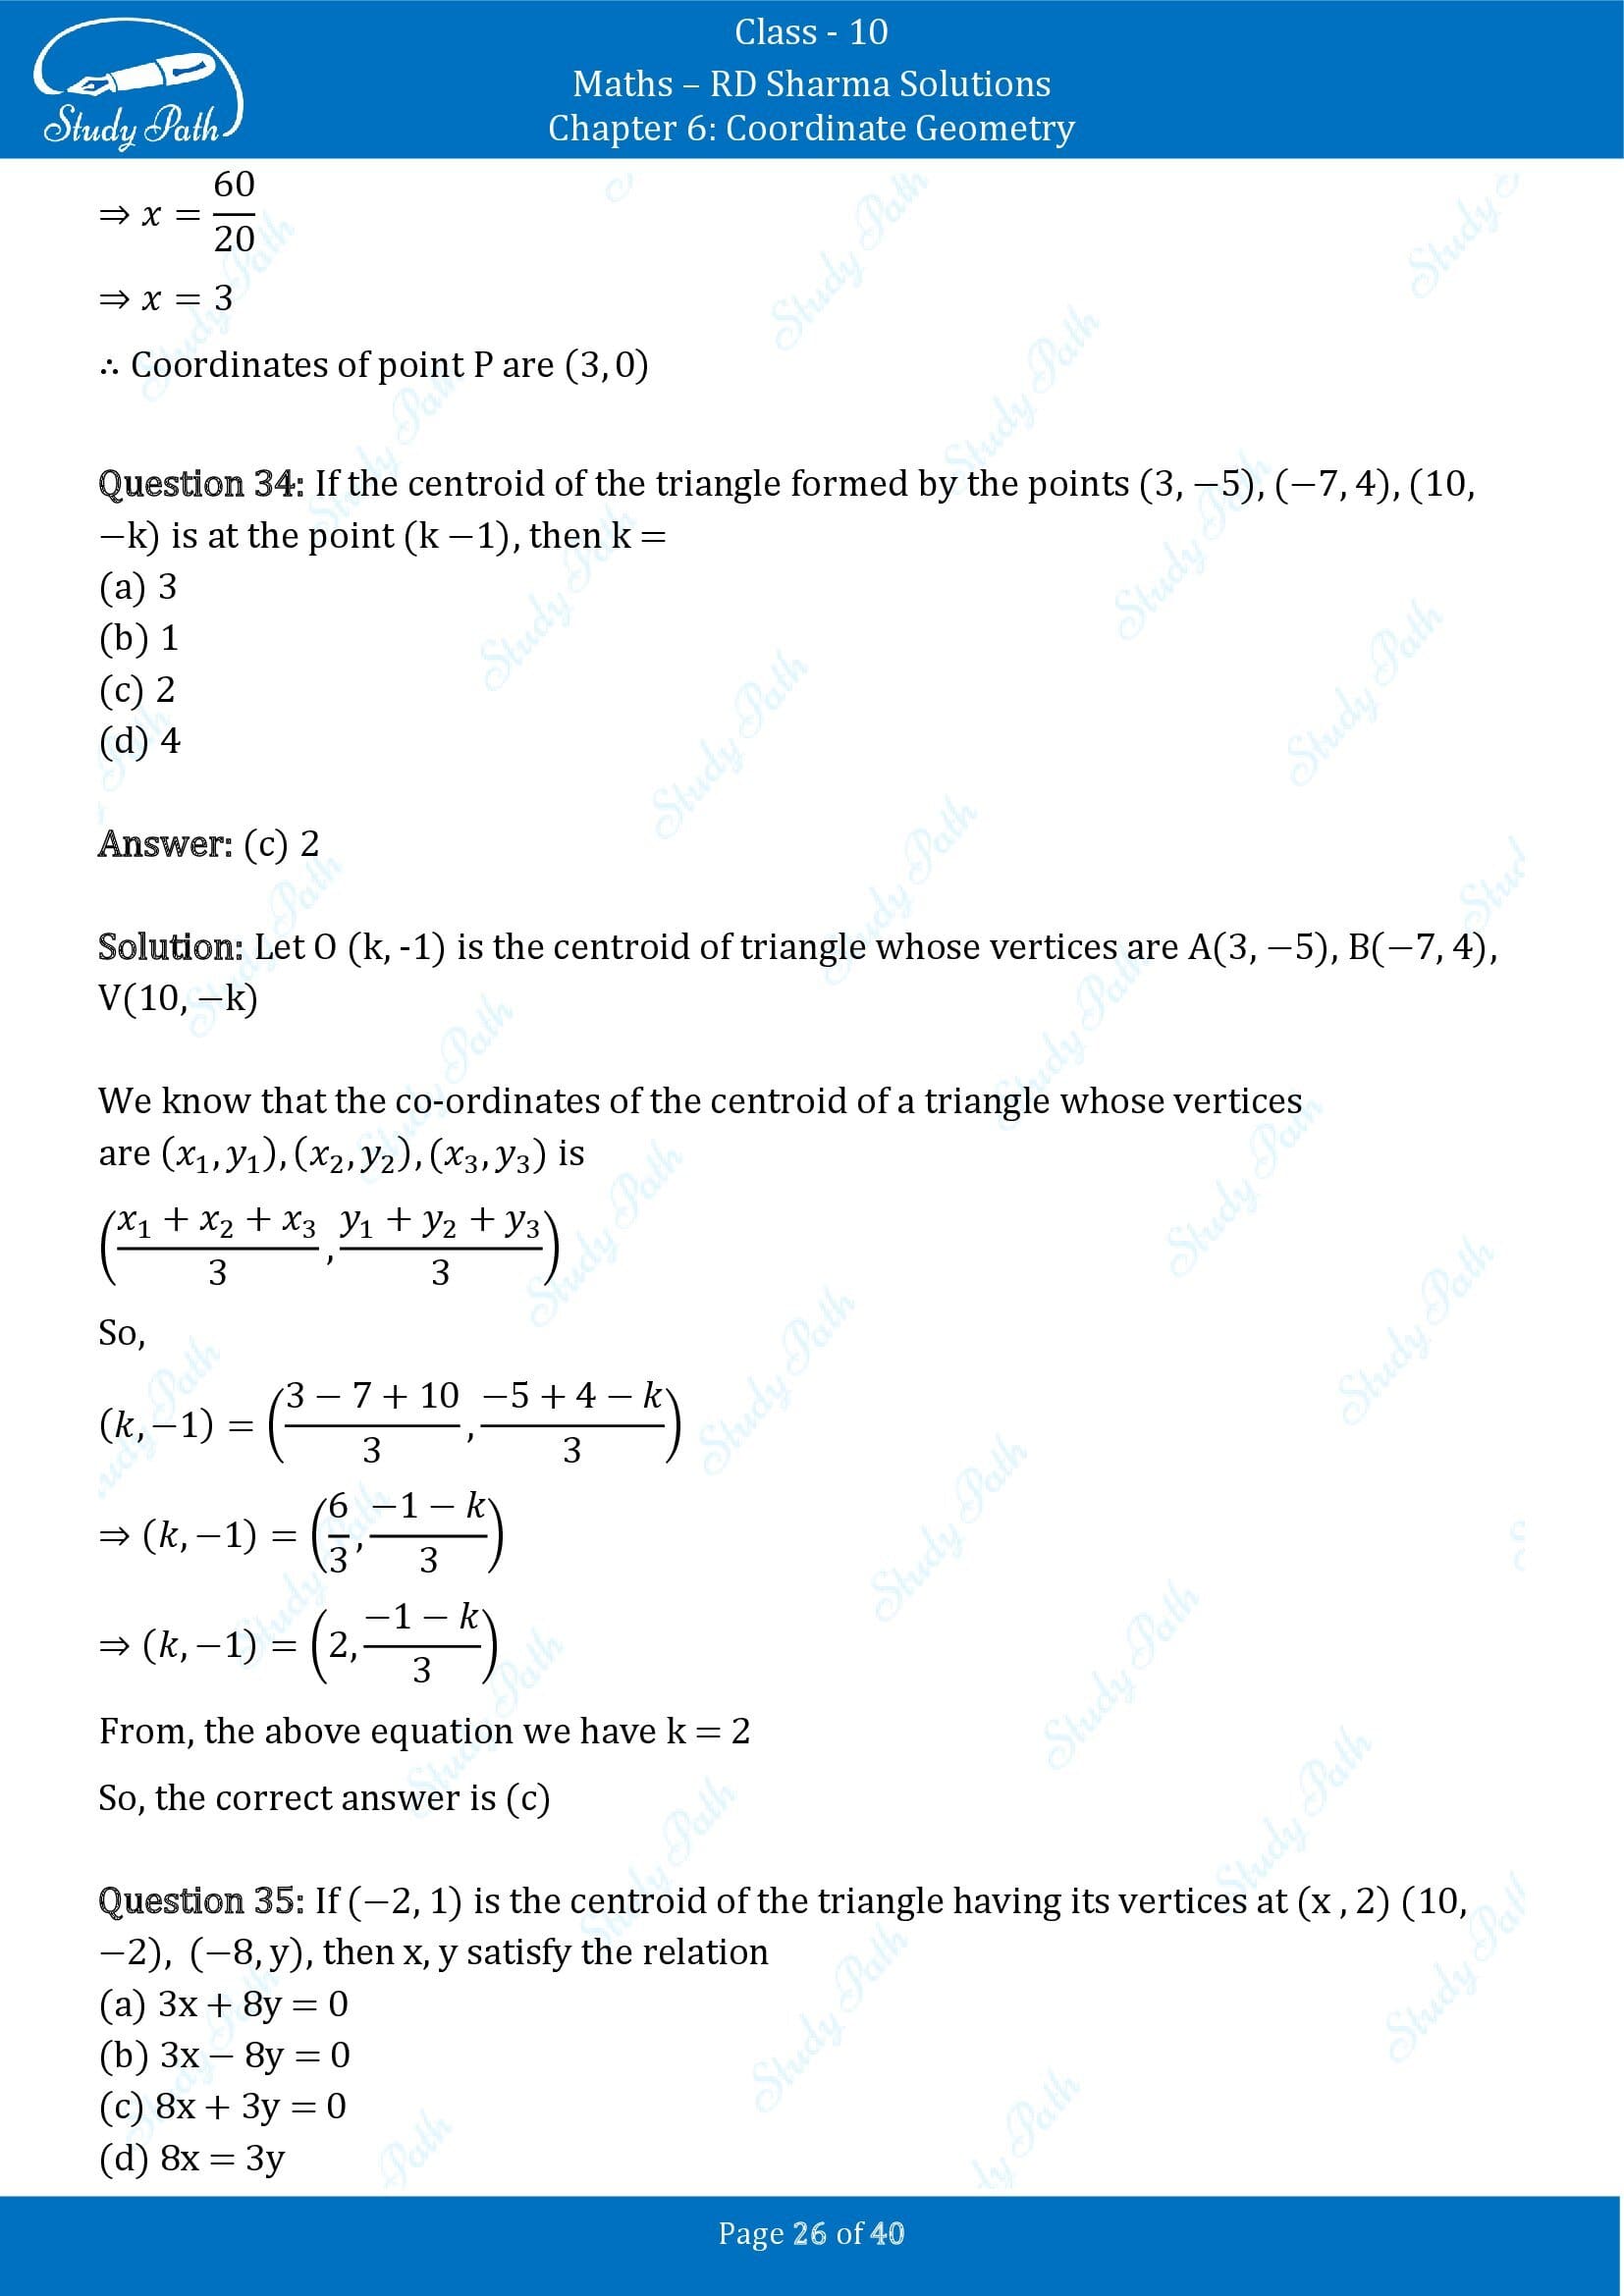 RD Sharma Solutions Class 10 Chapter 6 Coordinate Geometry Multiple Choice Question MCQs 00026